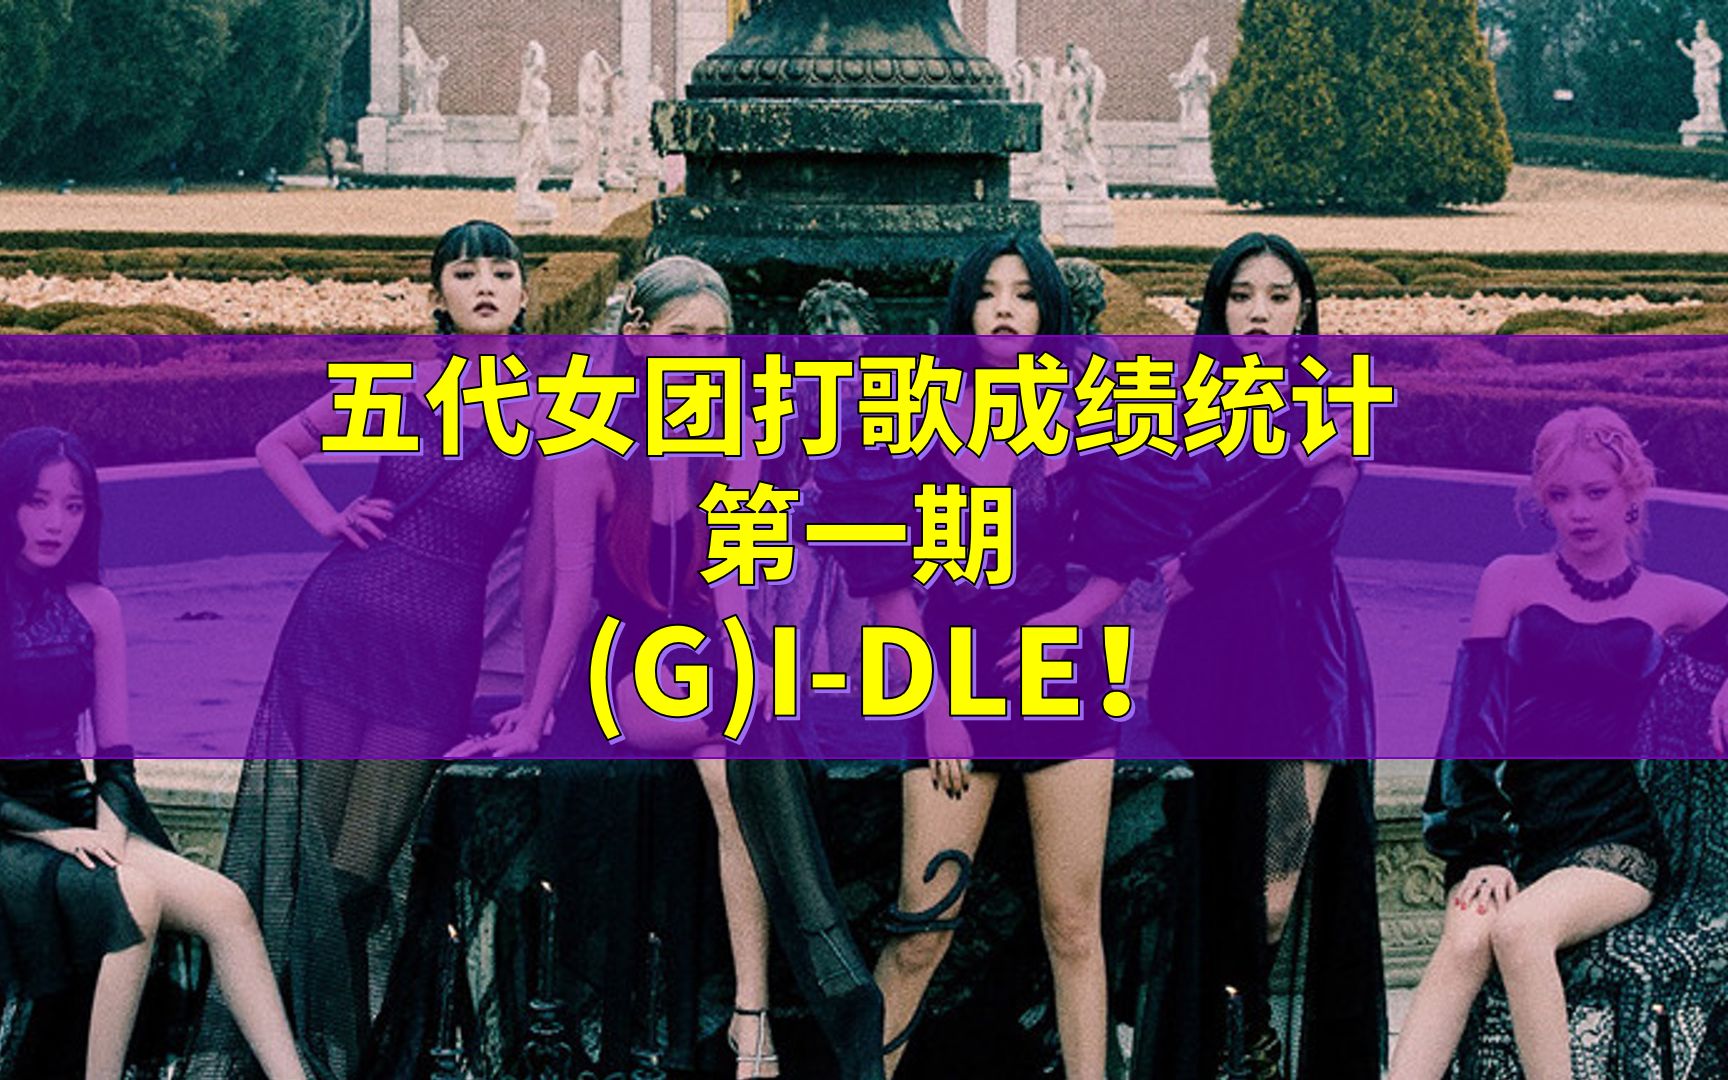 G)I-DLE】201107 音乐中心 'DON'T TOUCH ME' cover舞台+直拍_哔哩哔哩_bilibili